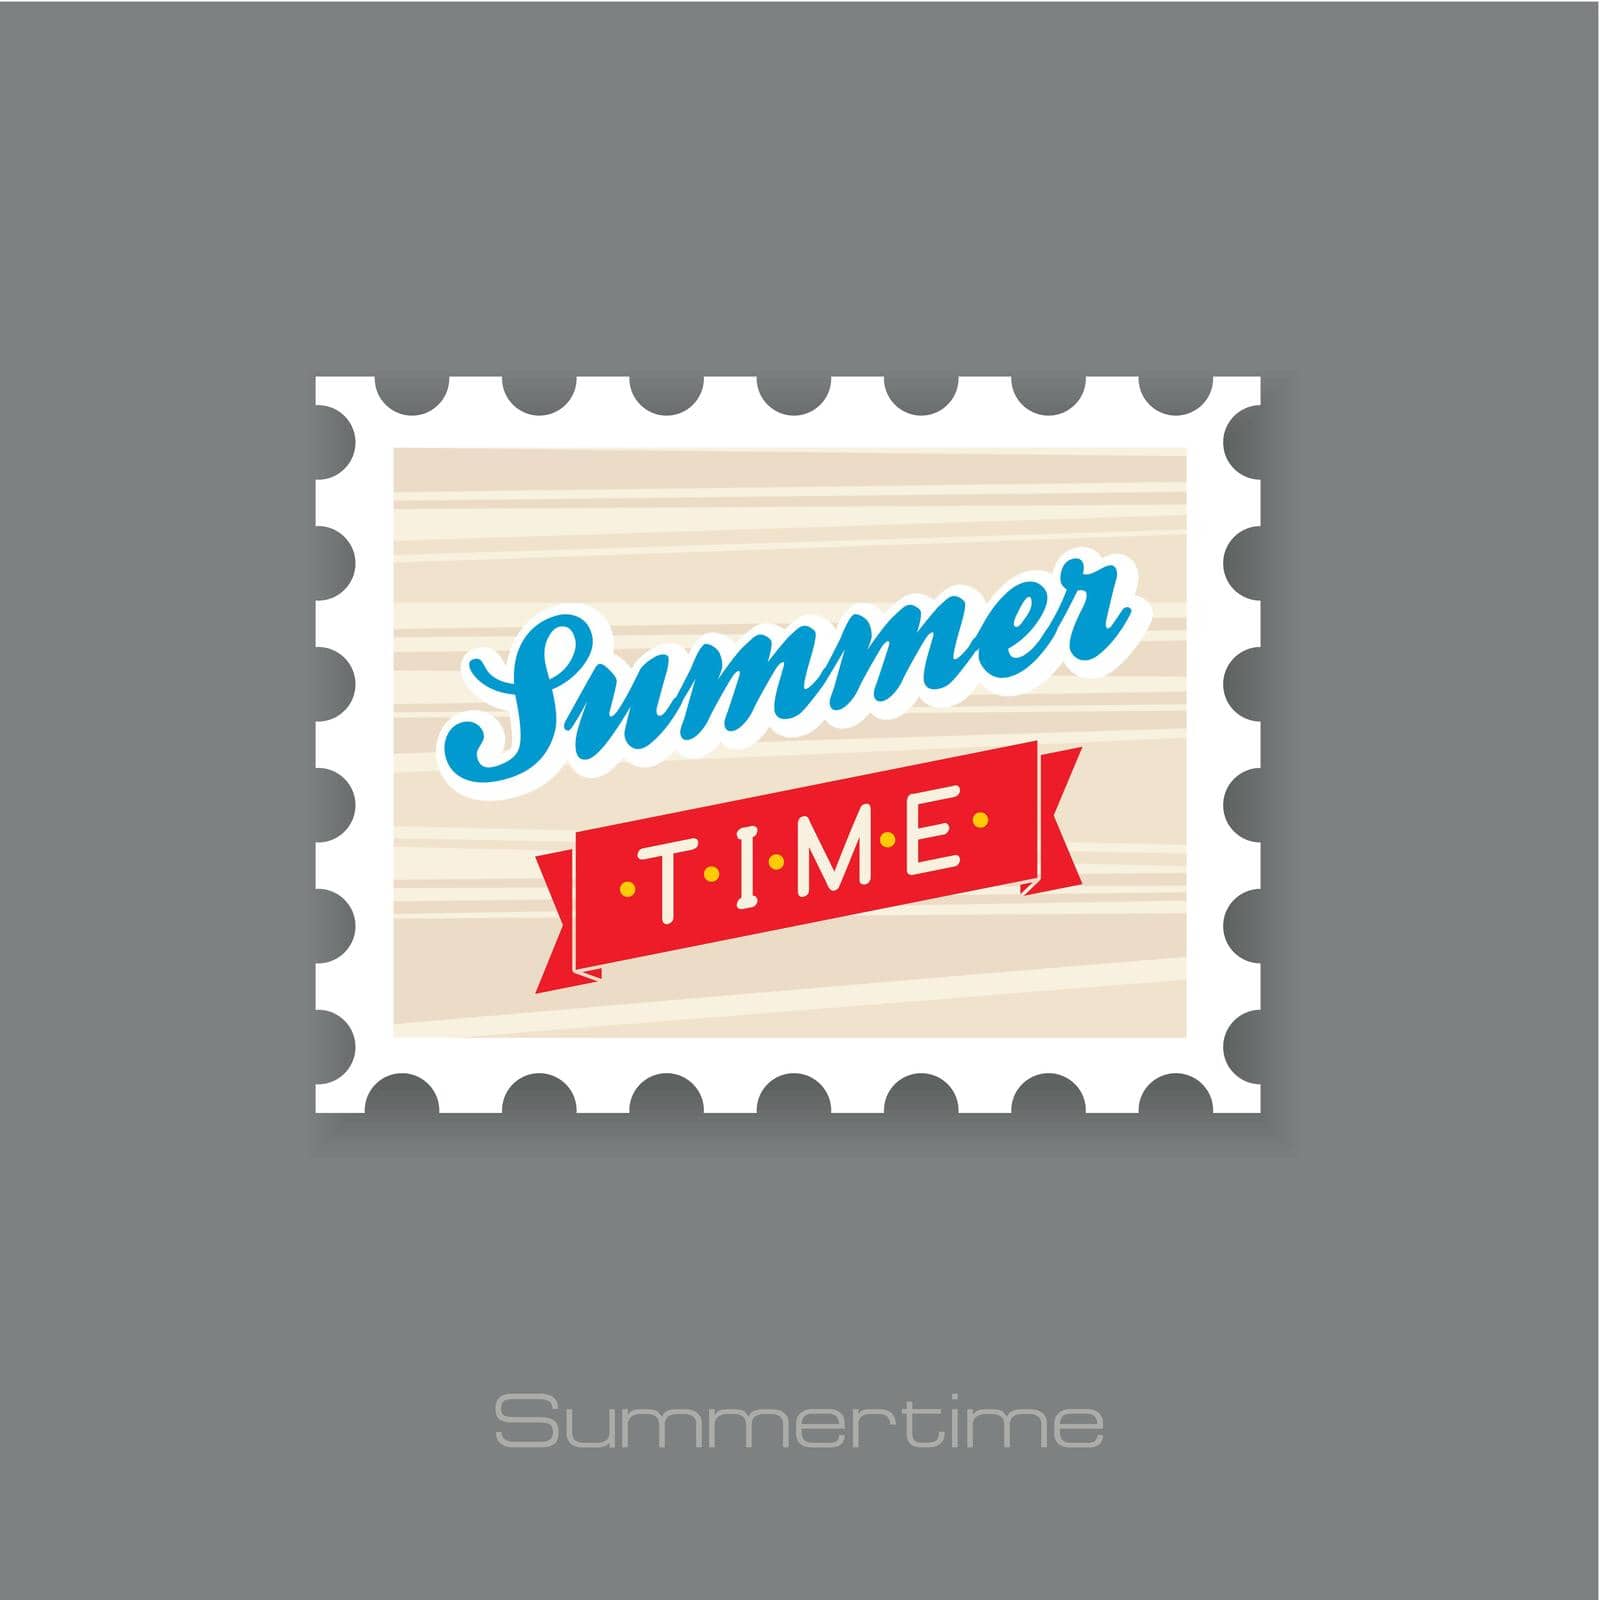 Summertime stamp. Vacation. Summer by nosik